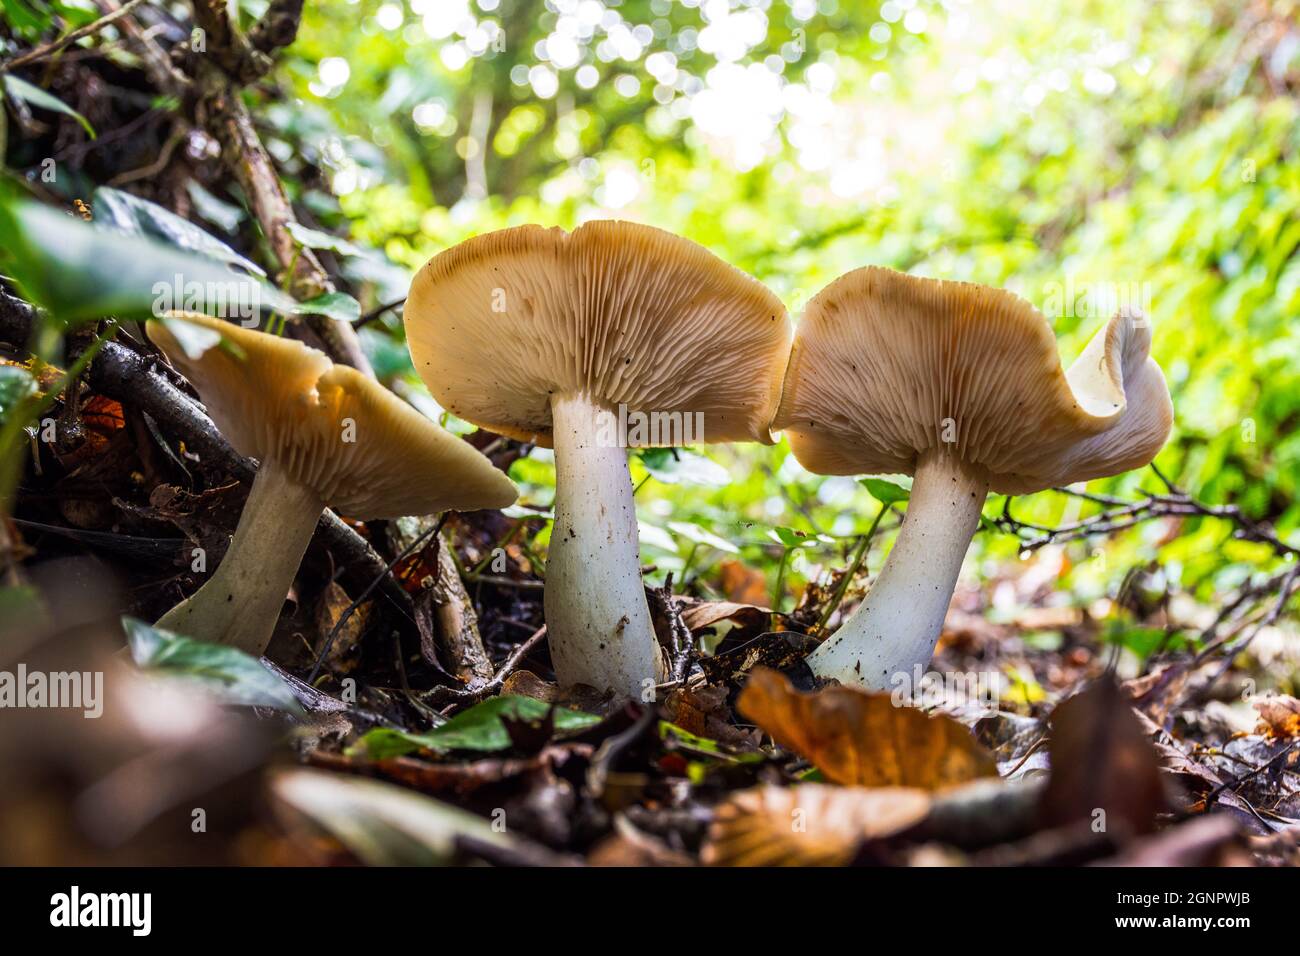 Russula betularum, commonly known as the birch brittlegill, wild mushrooms on forest floor in County Donegal, Ireland Stock Photo